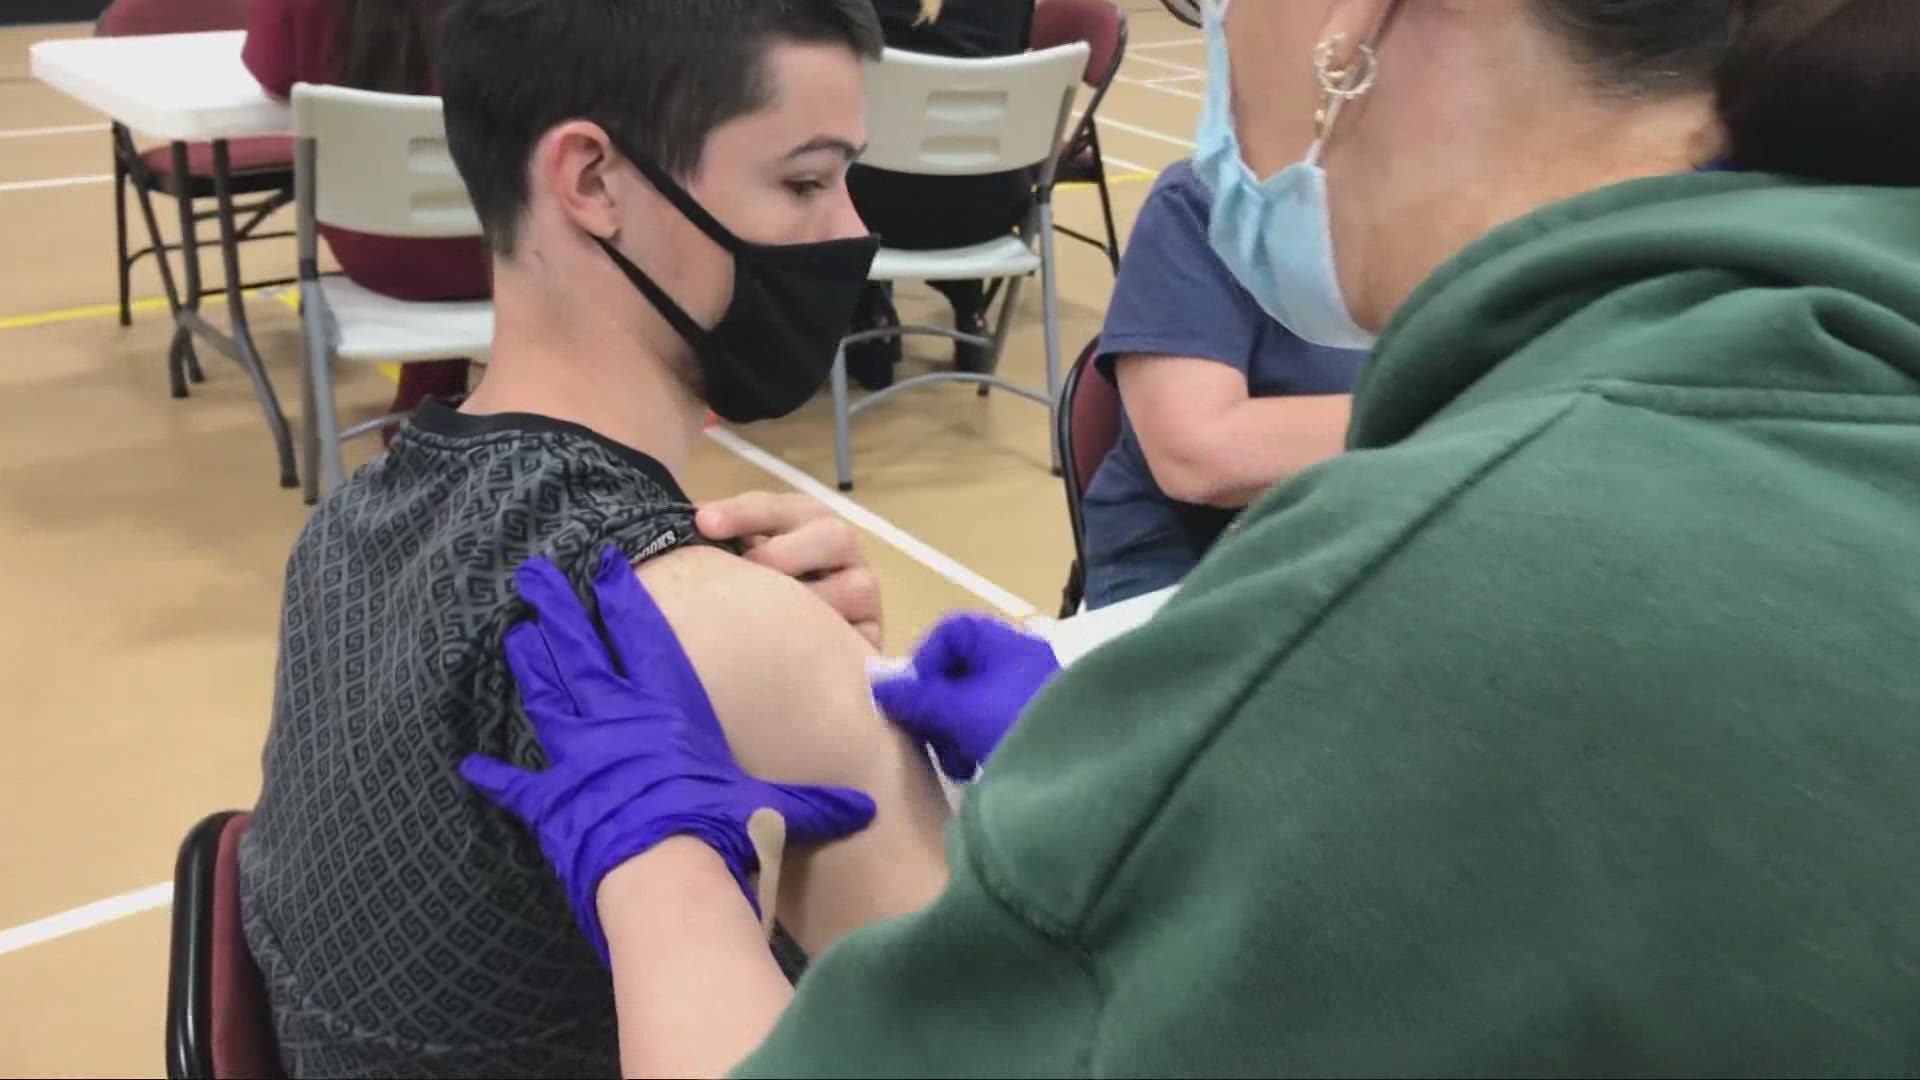 As more people are becoming eligible to receive the COVID-19 vaccine, vaccine clinics are allowing those who want the treatment to get one without an appointment.